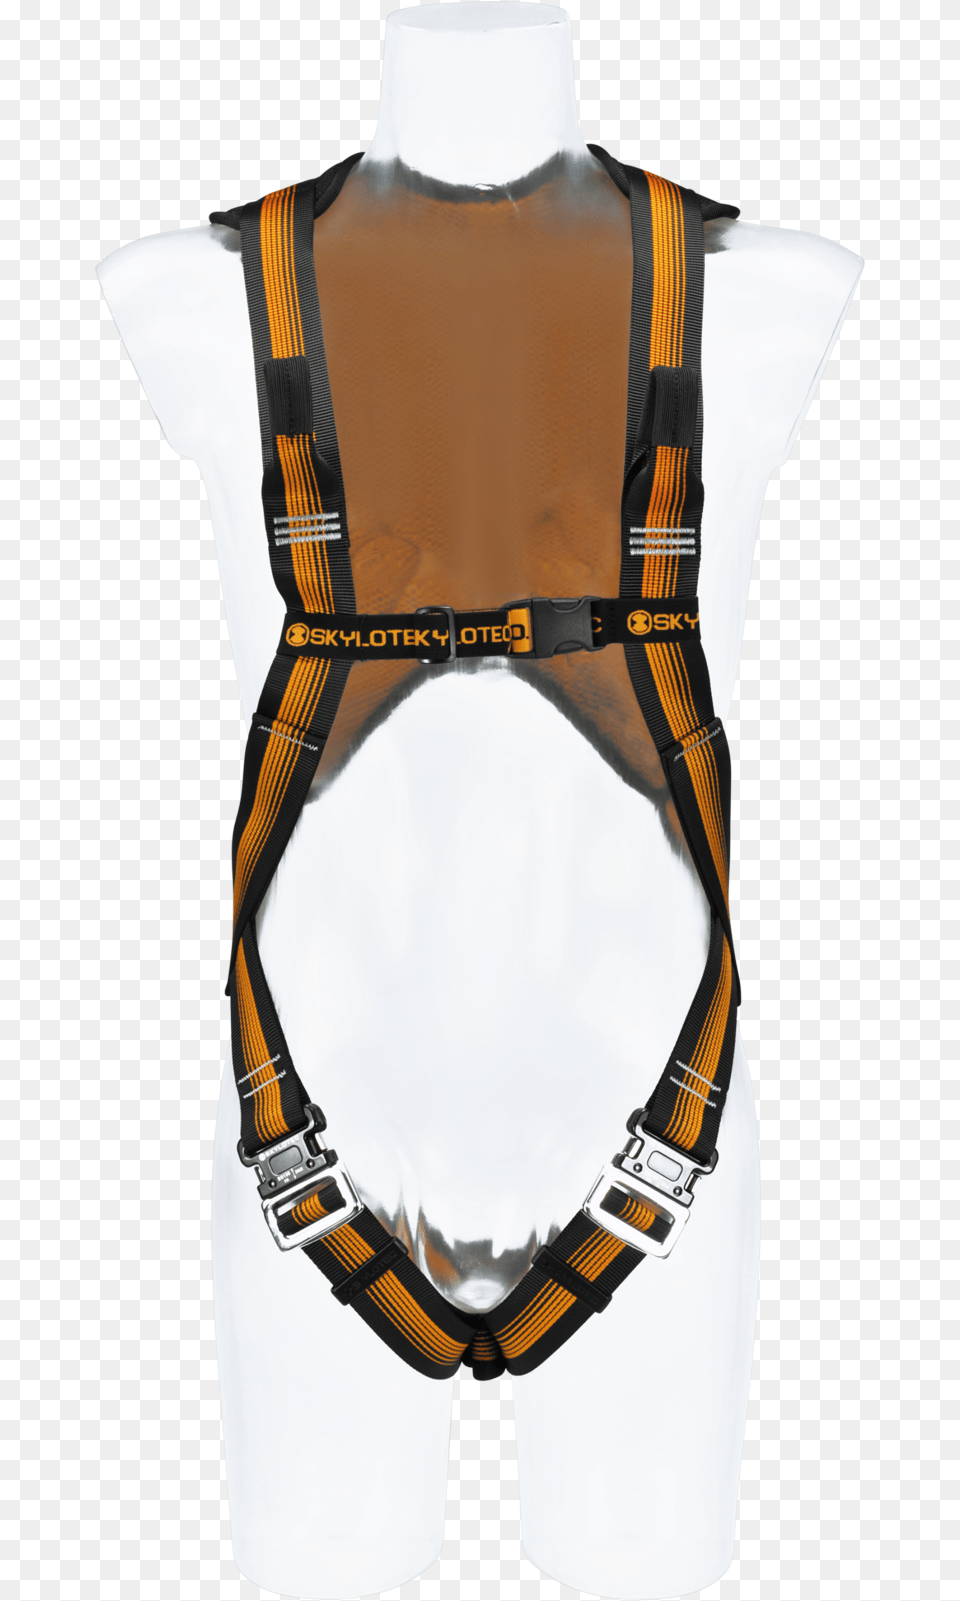 View Image Safety Harness, Clothing, Vest, Accessories Png